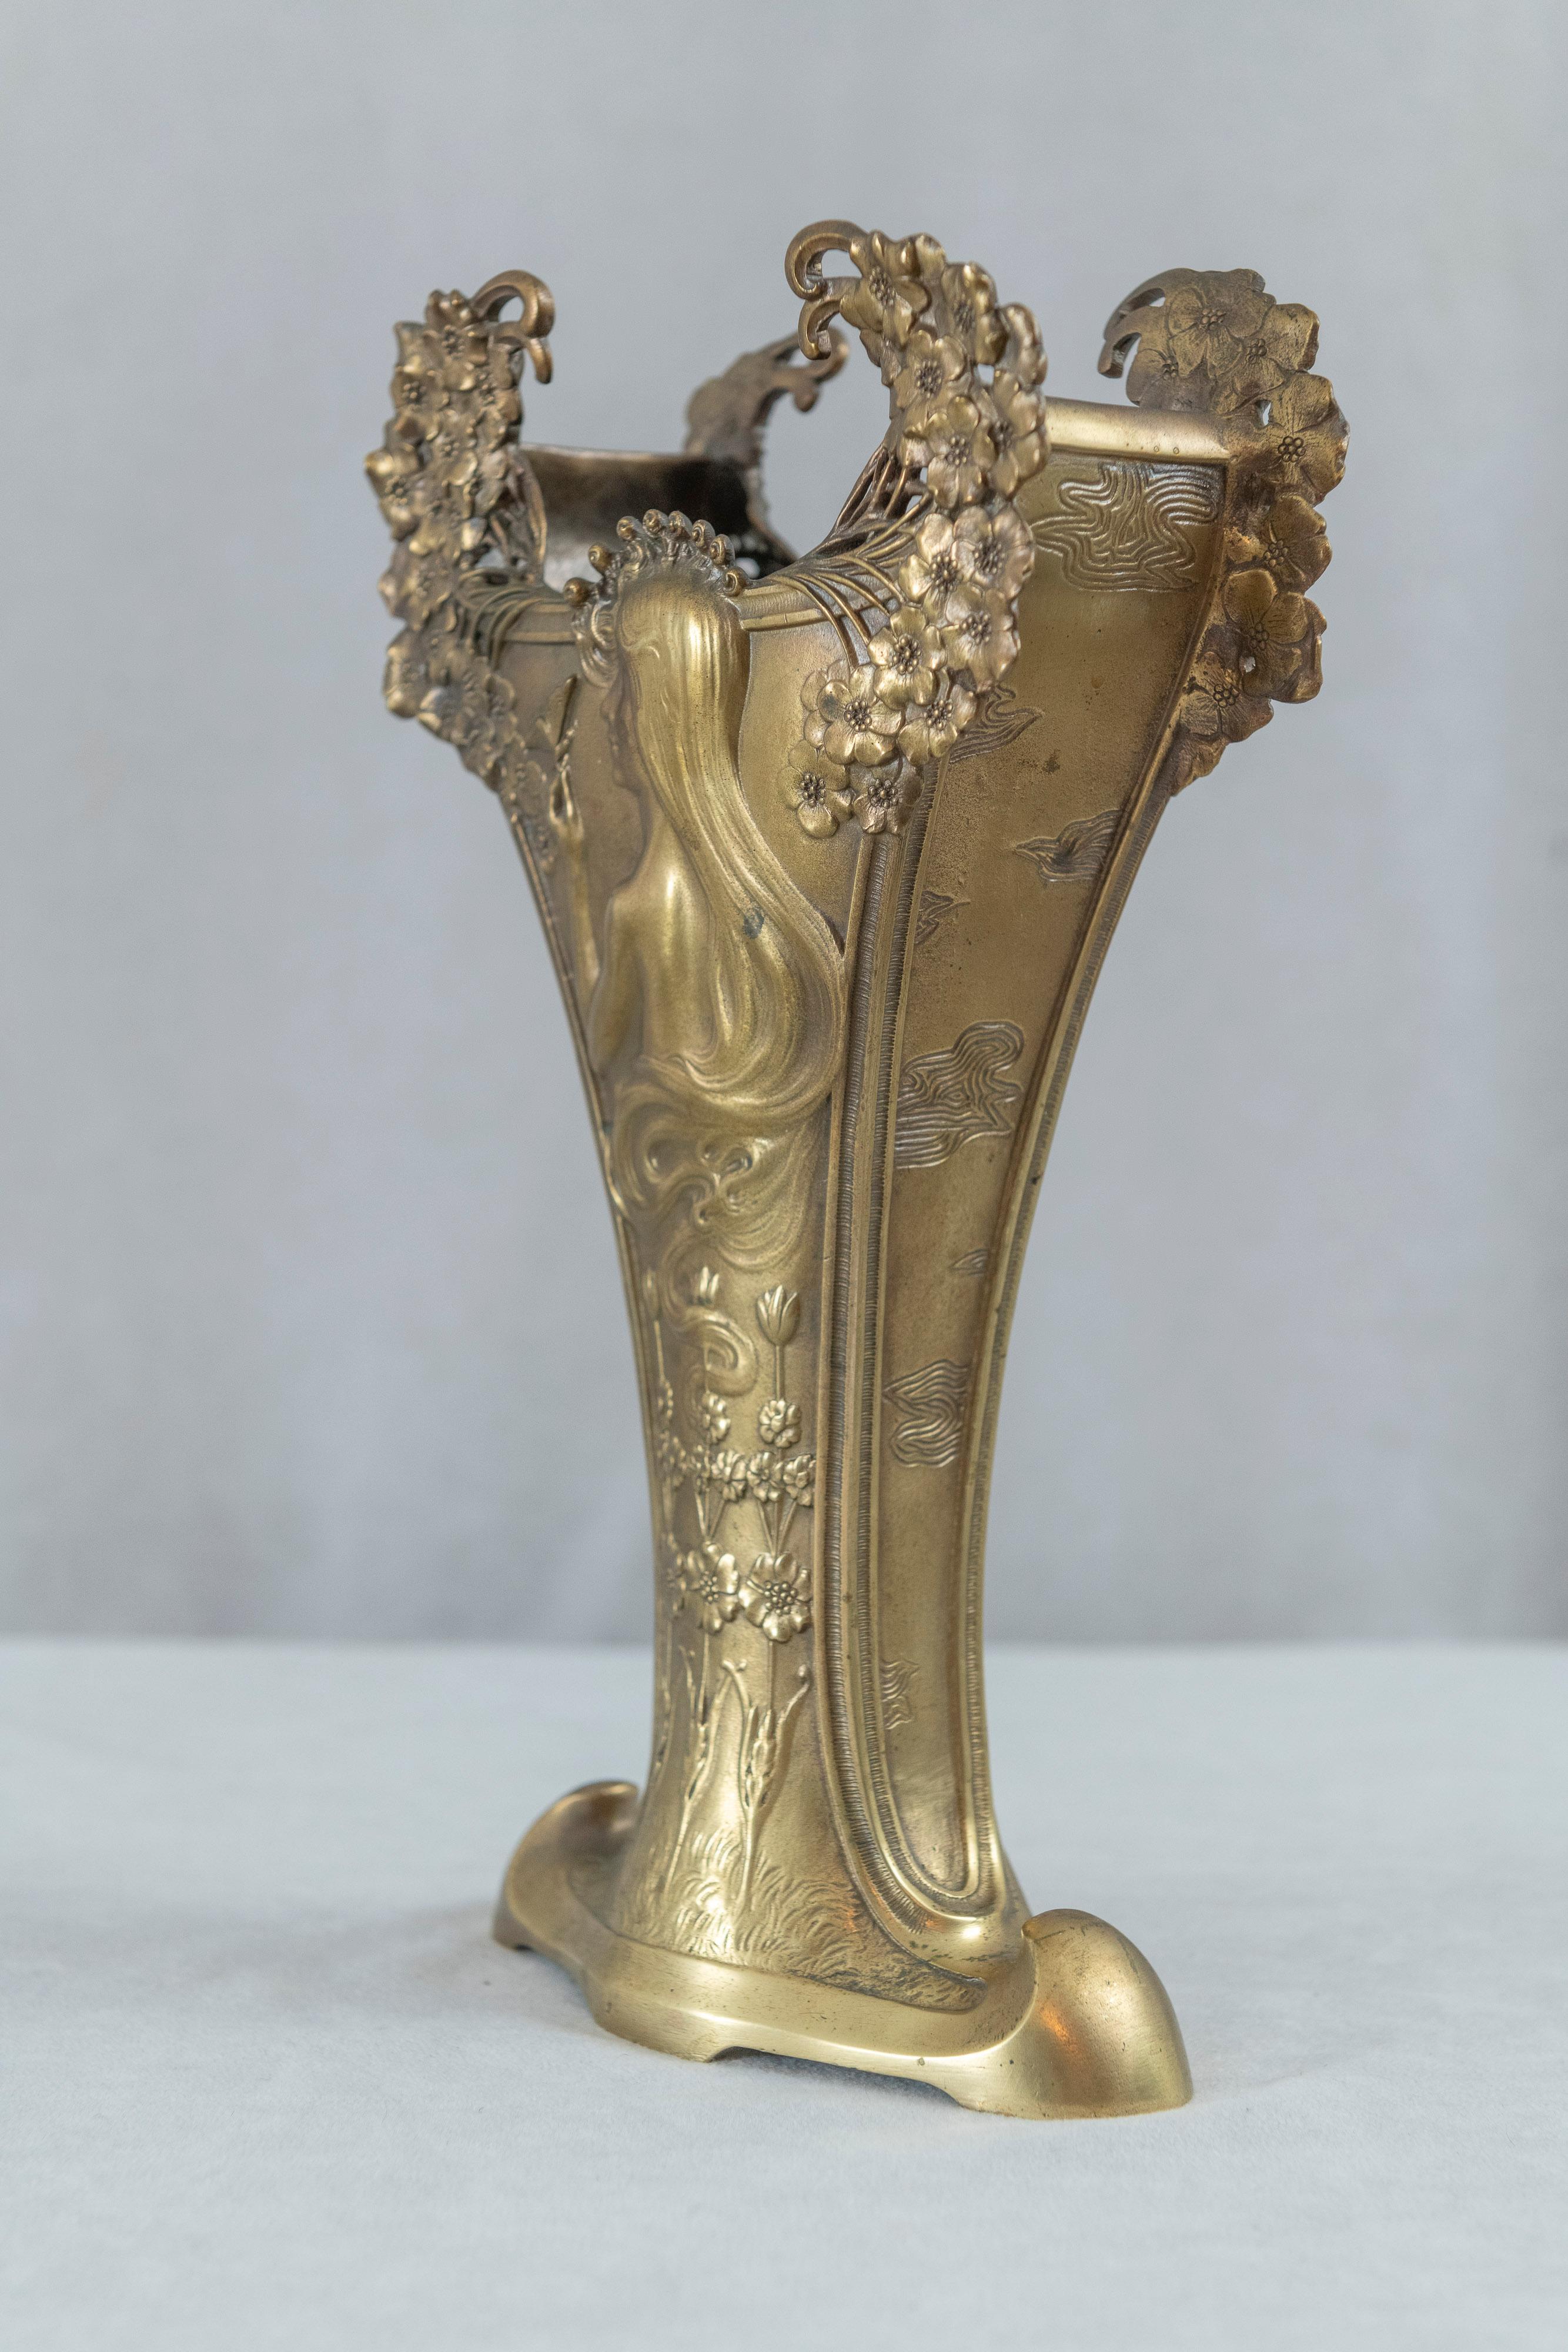  If we were going to show someone what an art nouveau bronze looks like, we might very well start here. This truly magnificent and exemplary vase has all the beautiful qualities of the art nouveau movement. Willowy flowers, sinewy lines, and the